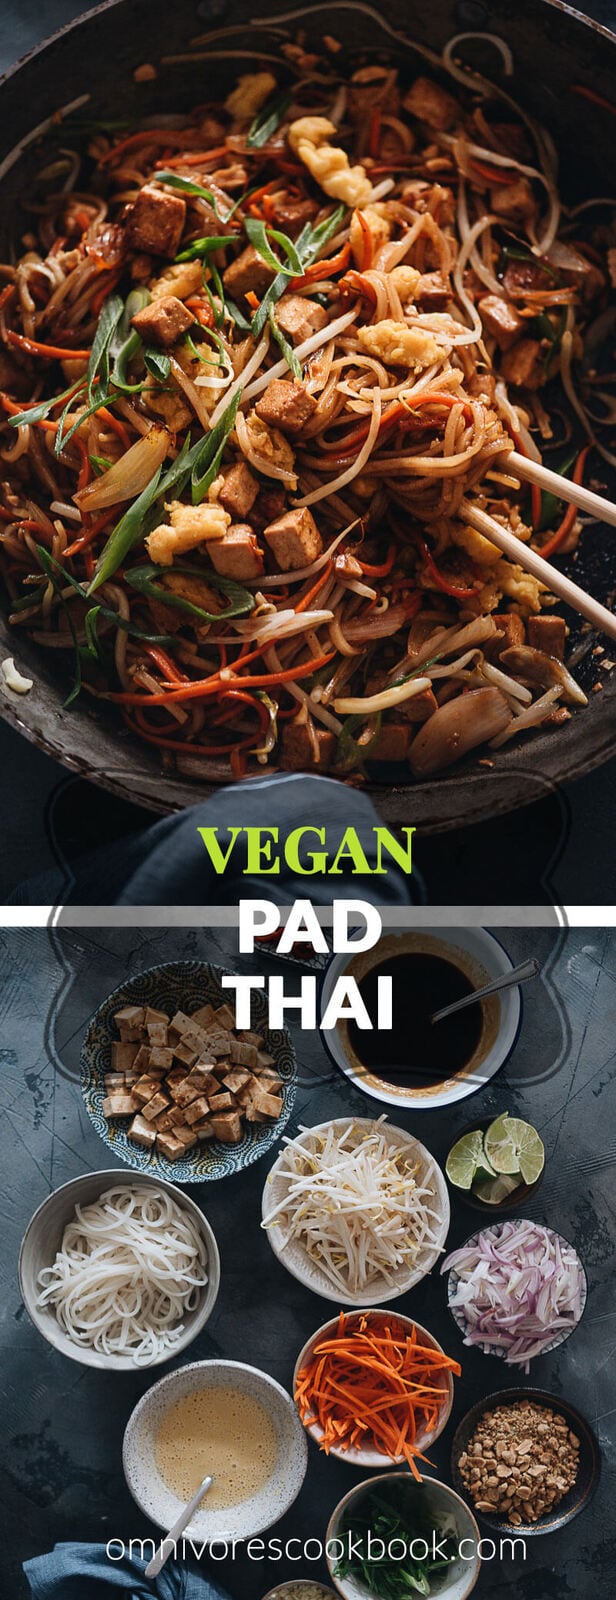 Vegan Pad Thai - The fat noodles are stir-fried with plenty of aromatics, veggies, vegan eggs, and marinated tofu in an extra rich sweet and sour sauce. Detailed cooking notes are included to guarantee you a great result that tastes even better than the restaurant version. {Gluten-Free adaptable}